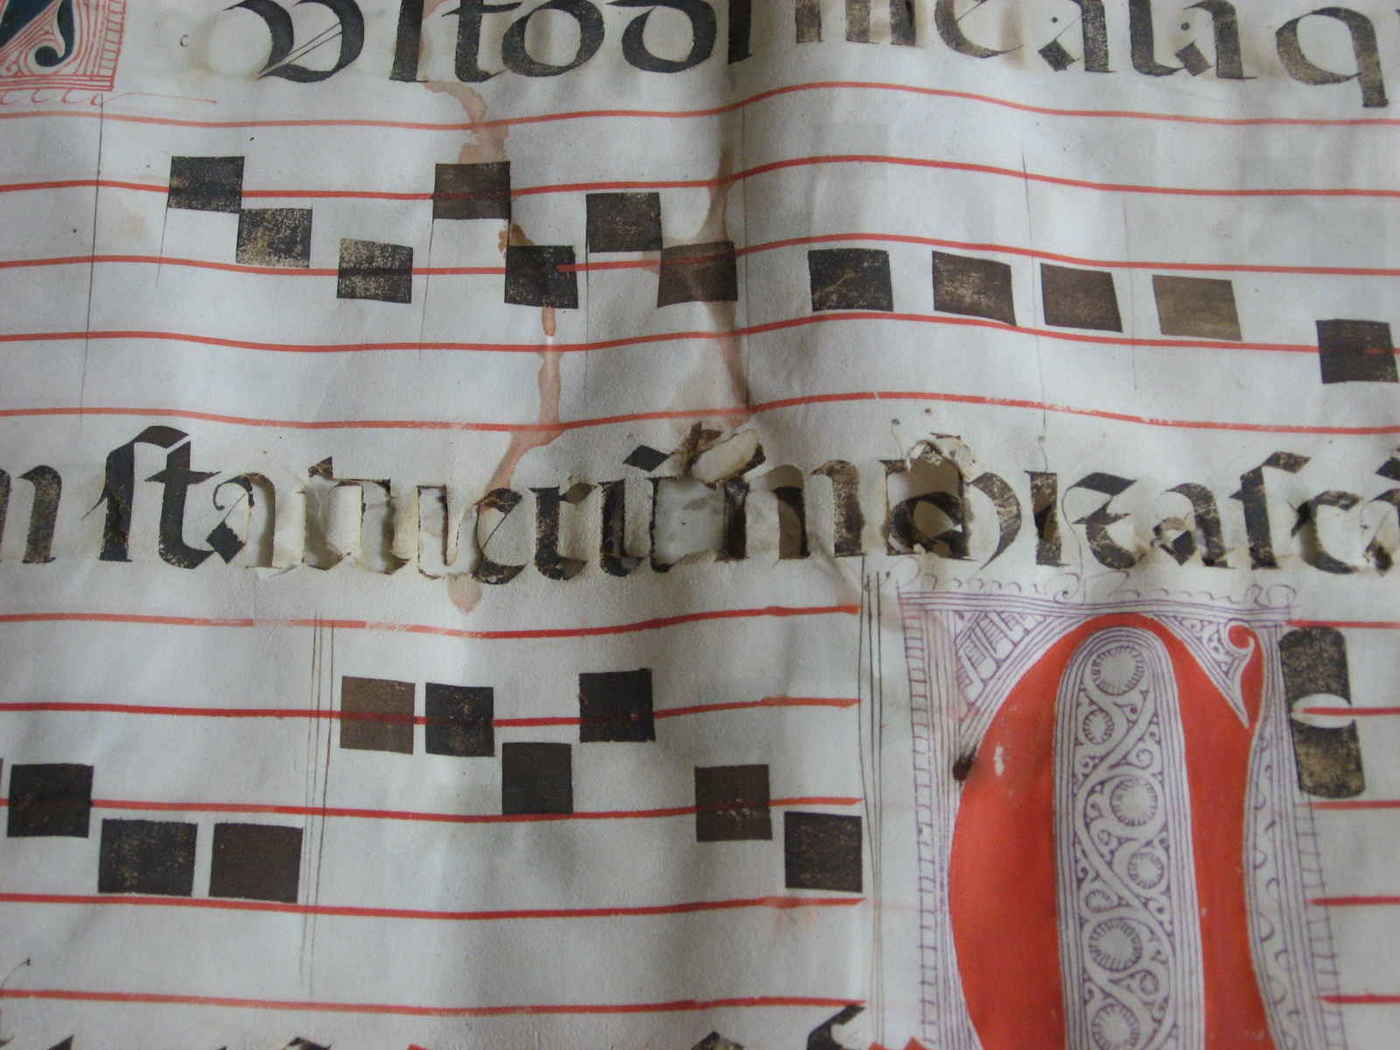 “Ink corrosion: iron gall ink has oxidized the cellulose, causing the paper to disintegrate. The manuscript is exhibited behind glass in a church in Evora, Portugal.” Photo taken 2007 by Ceinturion, unknown manuscript date (possibly a gradual?)